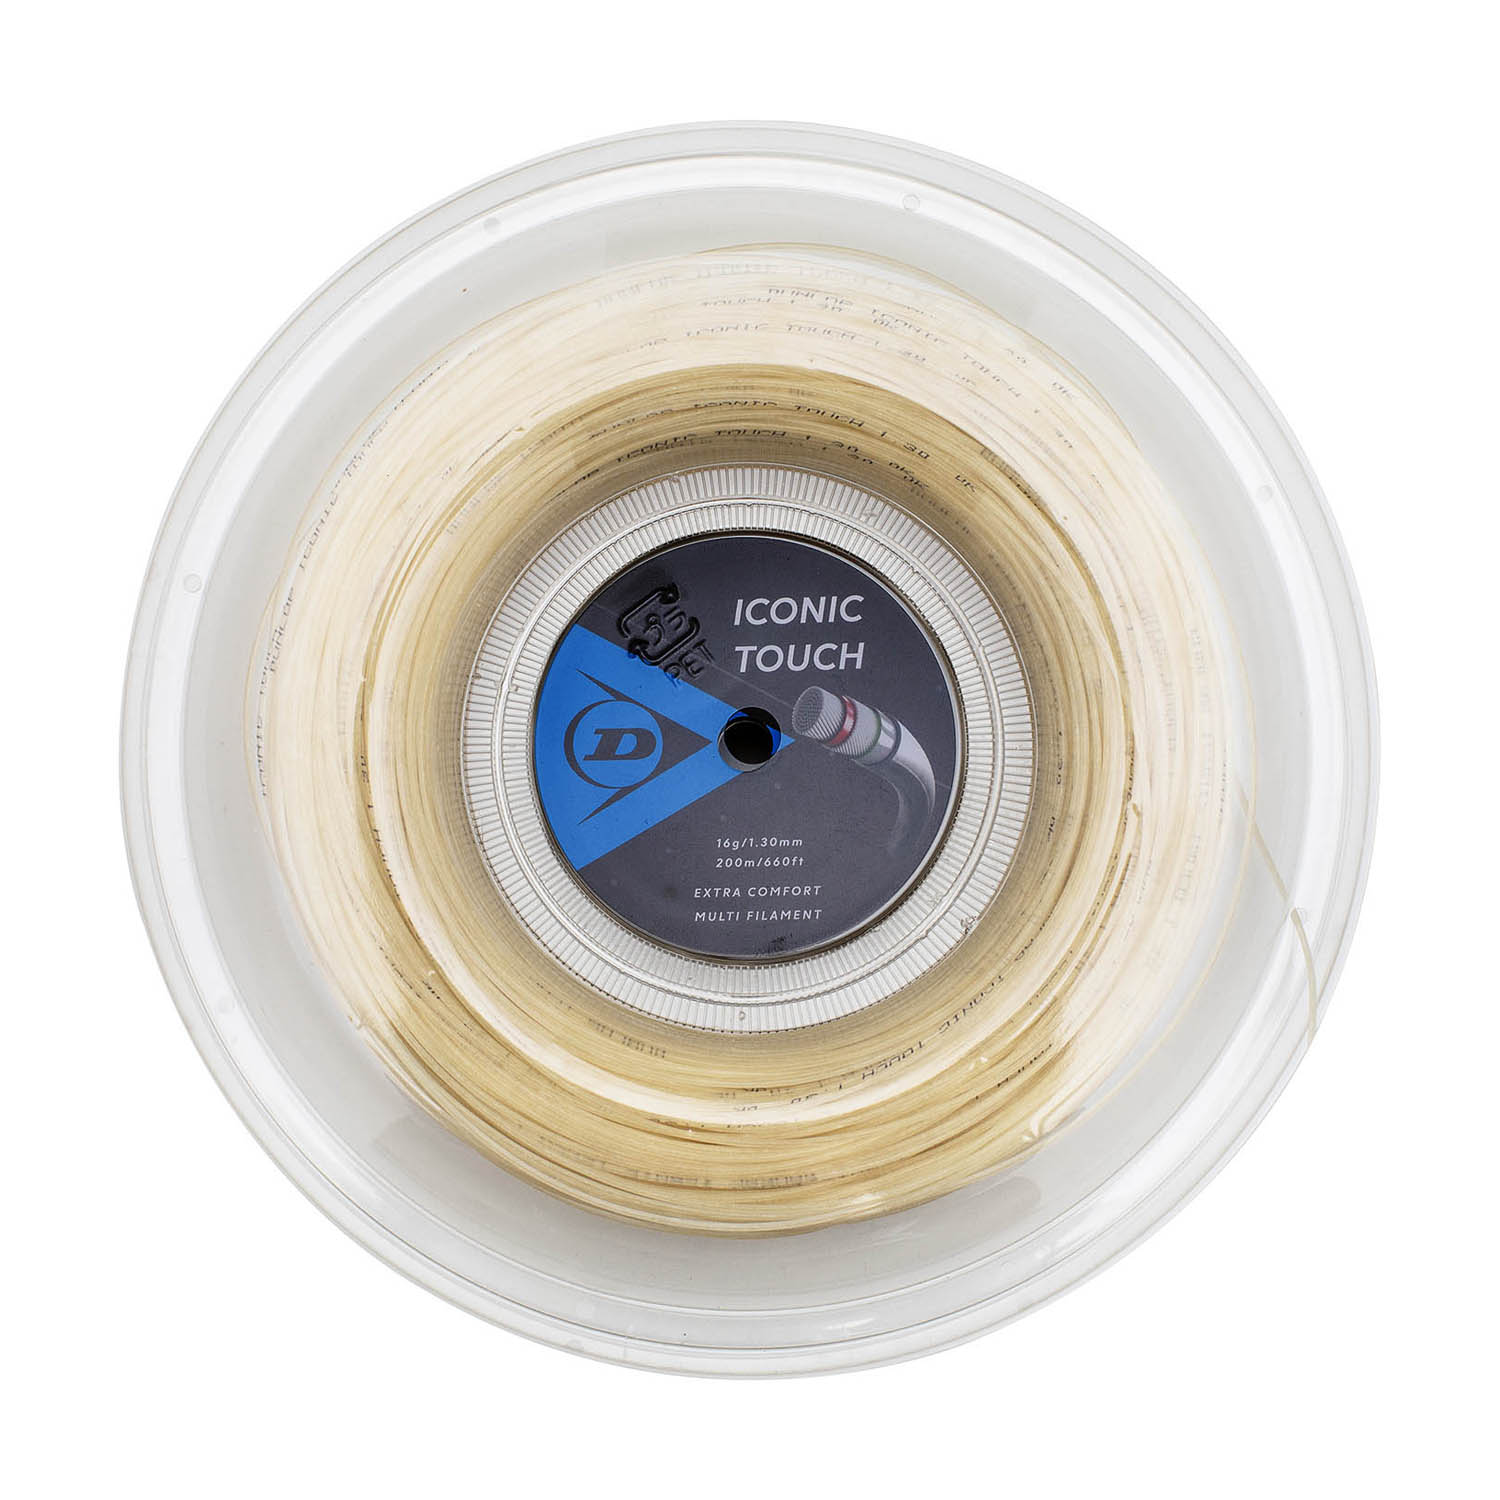 Dunlop Iconic Touch 1.30 200 m Reel - Natural